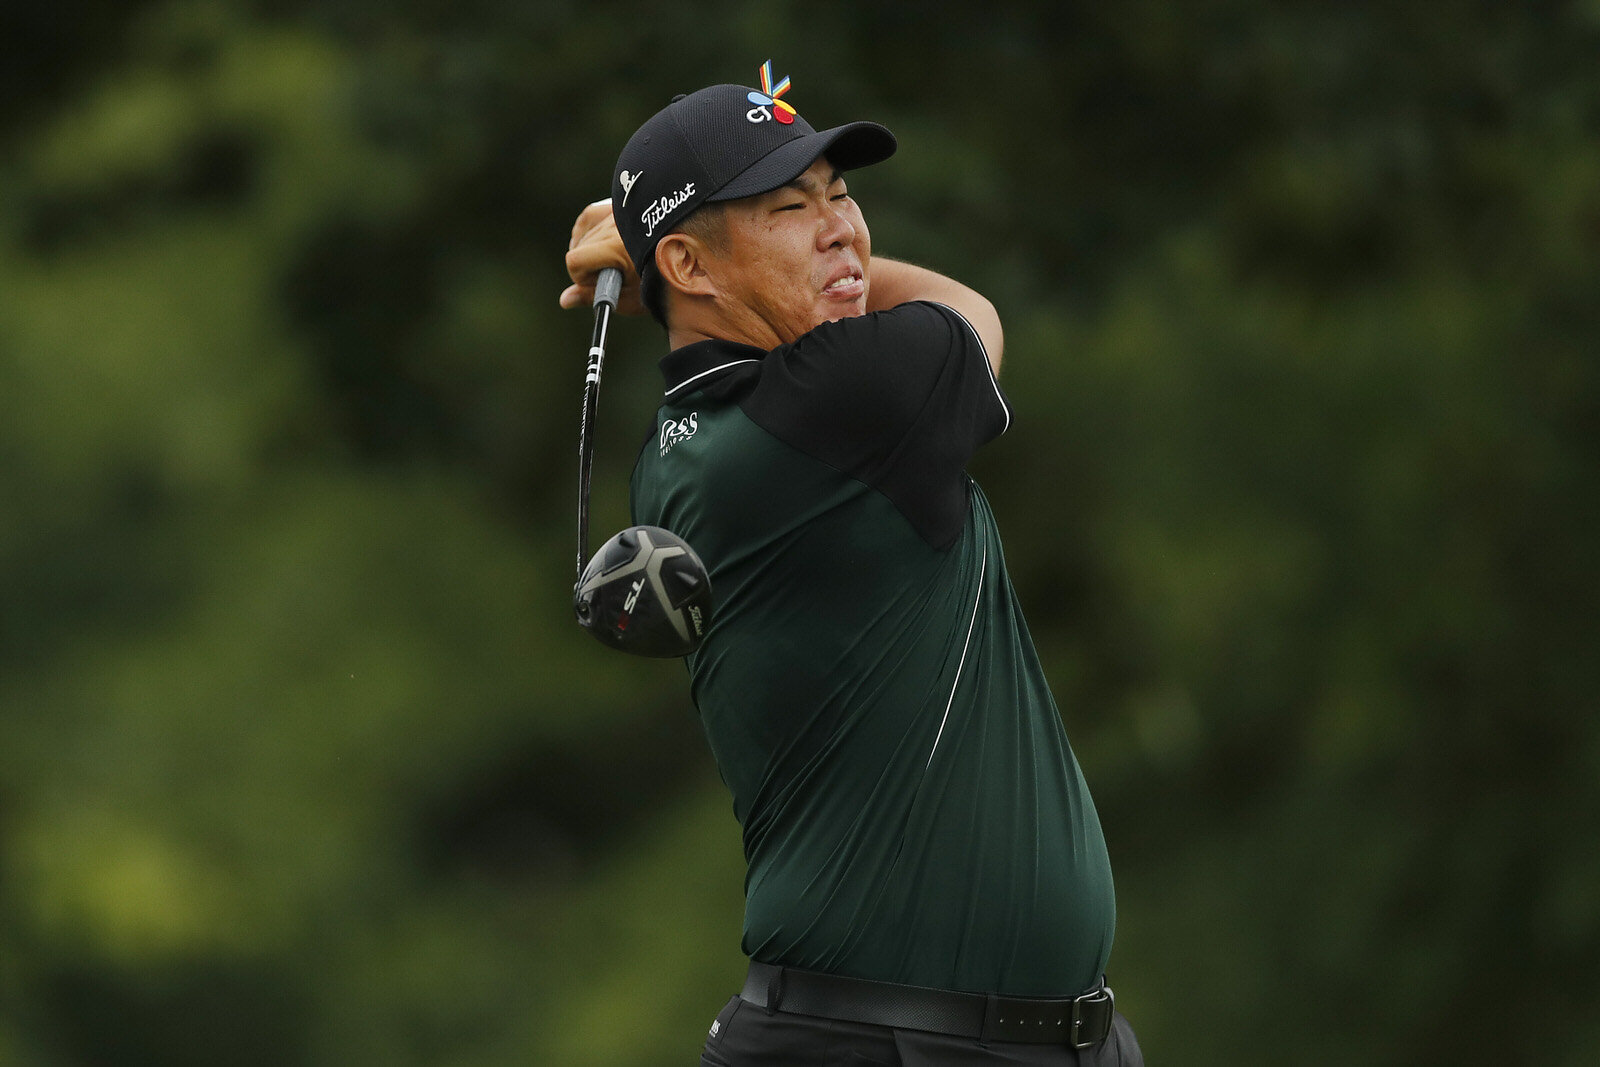  MEMPHIS, TENNESSEE - JULY 31: Byeong Hun An of Korea plays his shot from the 13th tee during the second round of the World Golf Championship-FedEx St Jude Invitational at TPC Southwind on July 31, 2020 in Memphis, Tennessee. (Photo by Michael Reaves